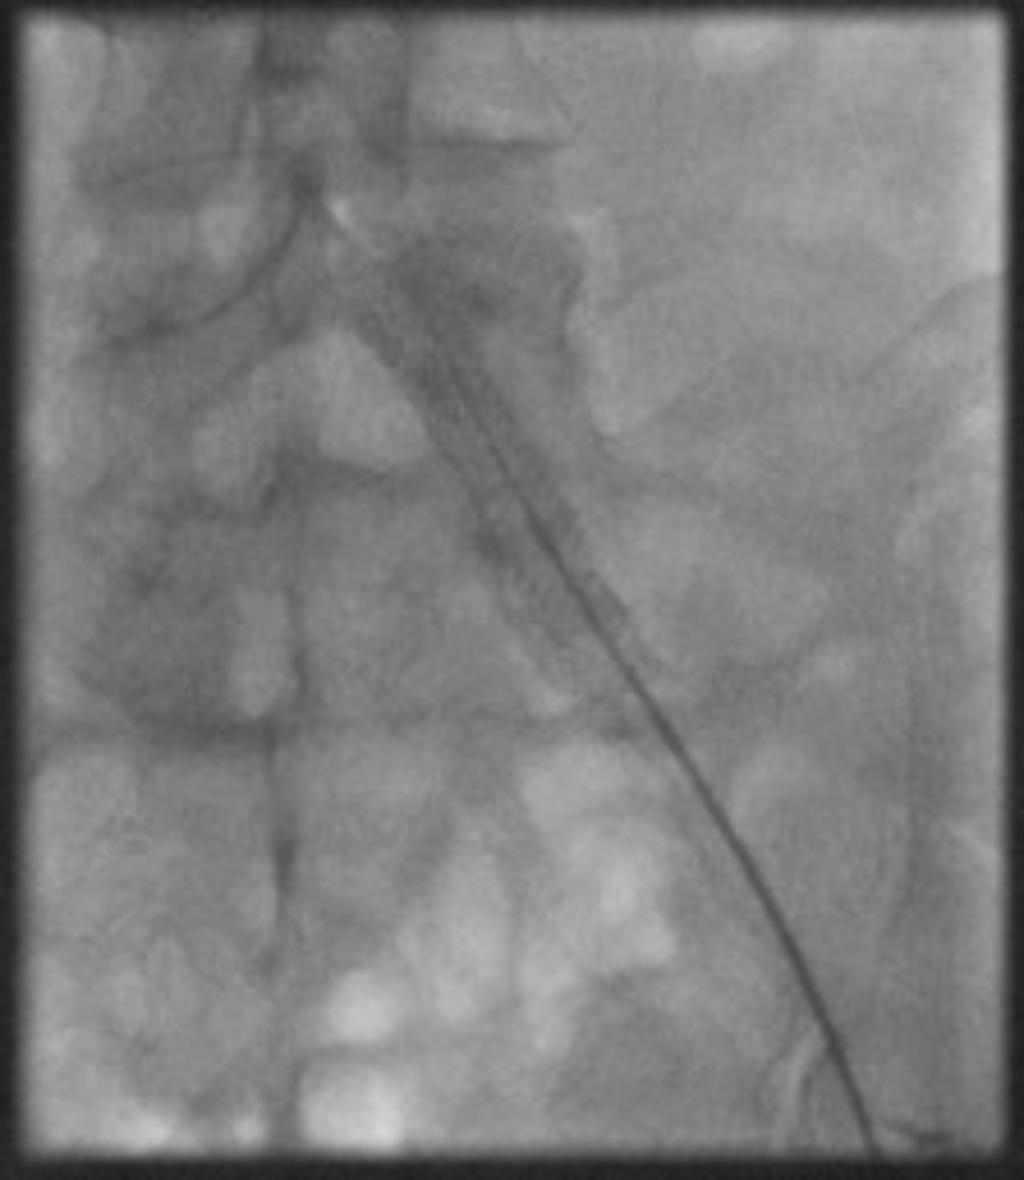 Fig. 10: DSA shows occluded left CIA stent Fig.